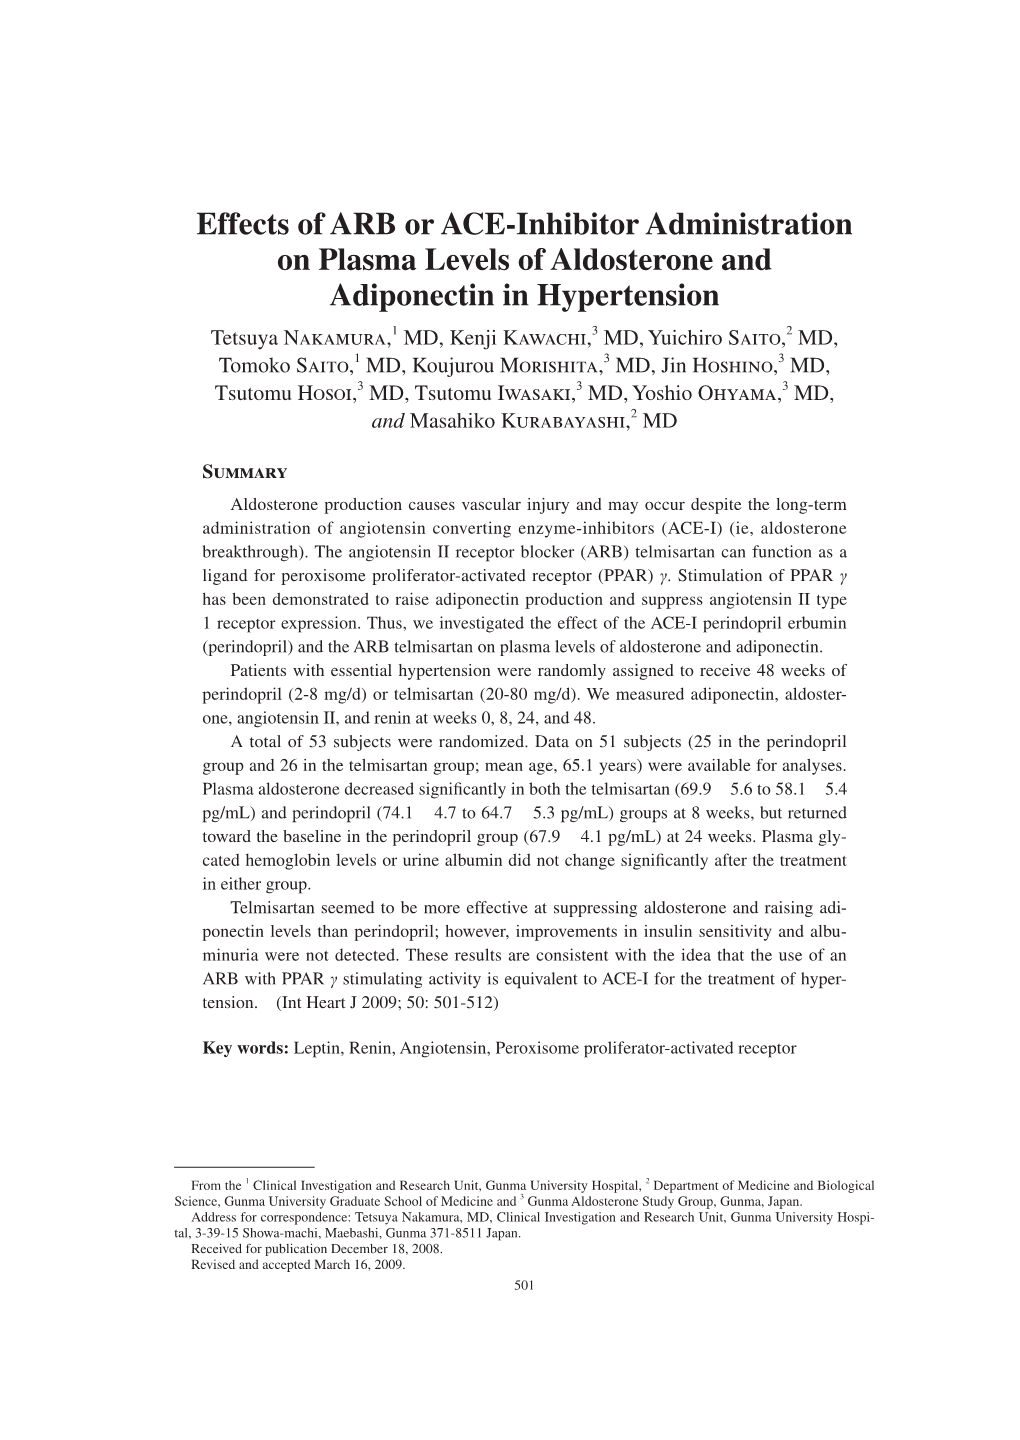 Effects of ARB Or ACE-Inhibitor Administration on Plasma Levels Of